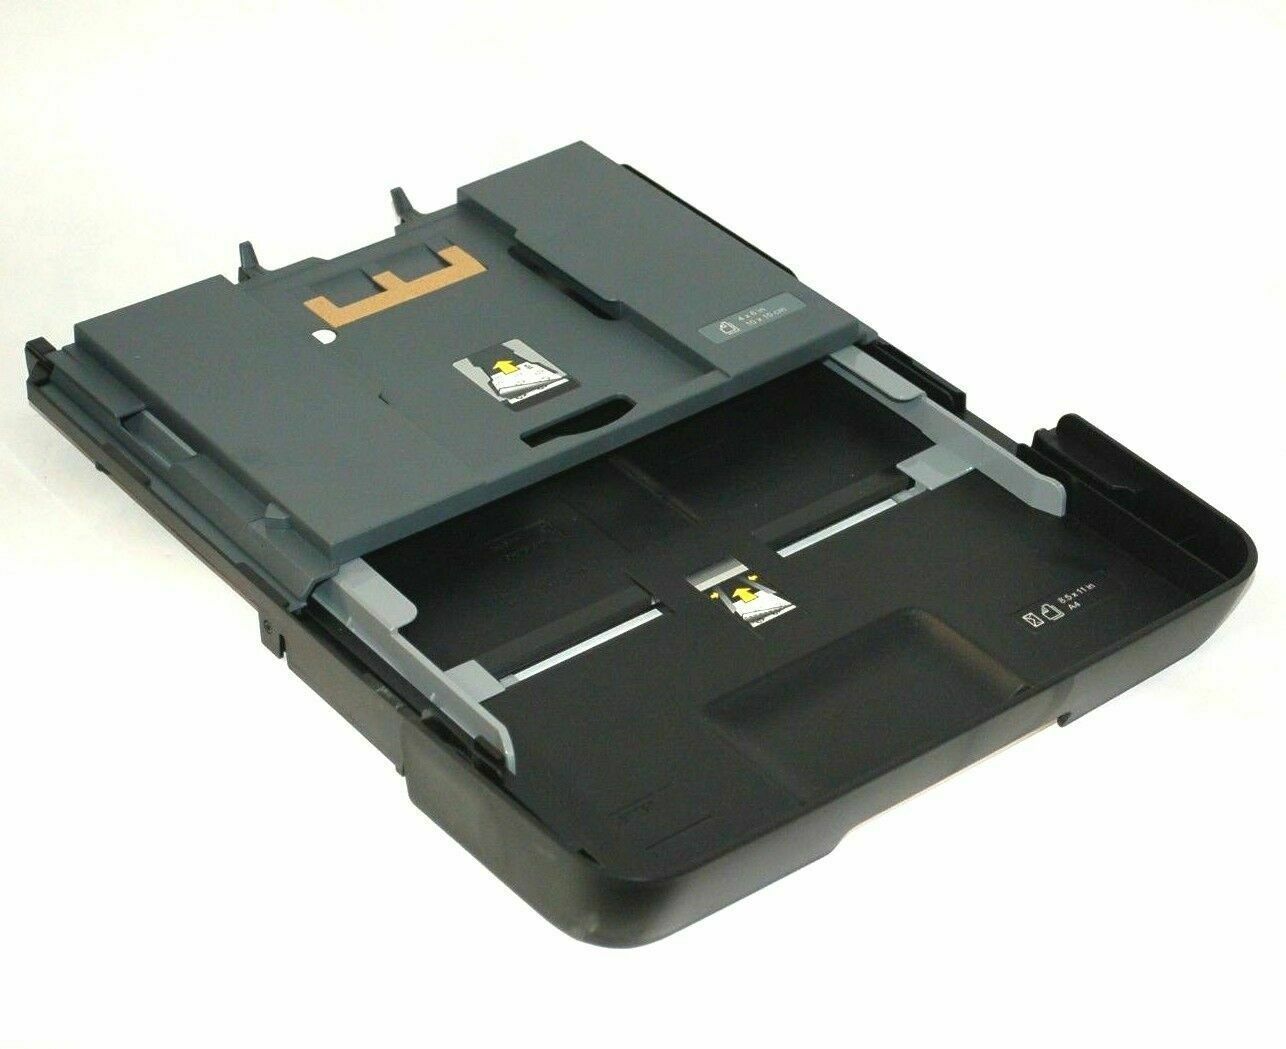 Hp Envy 5540 Paper Load Main Cassette Tray Drawer Feeders And Trays